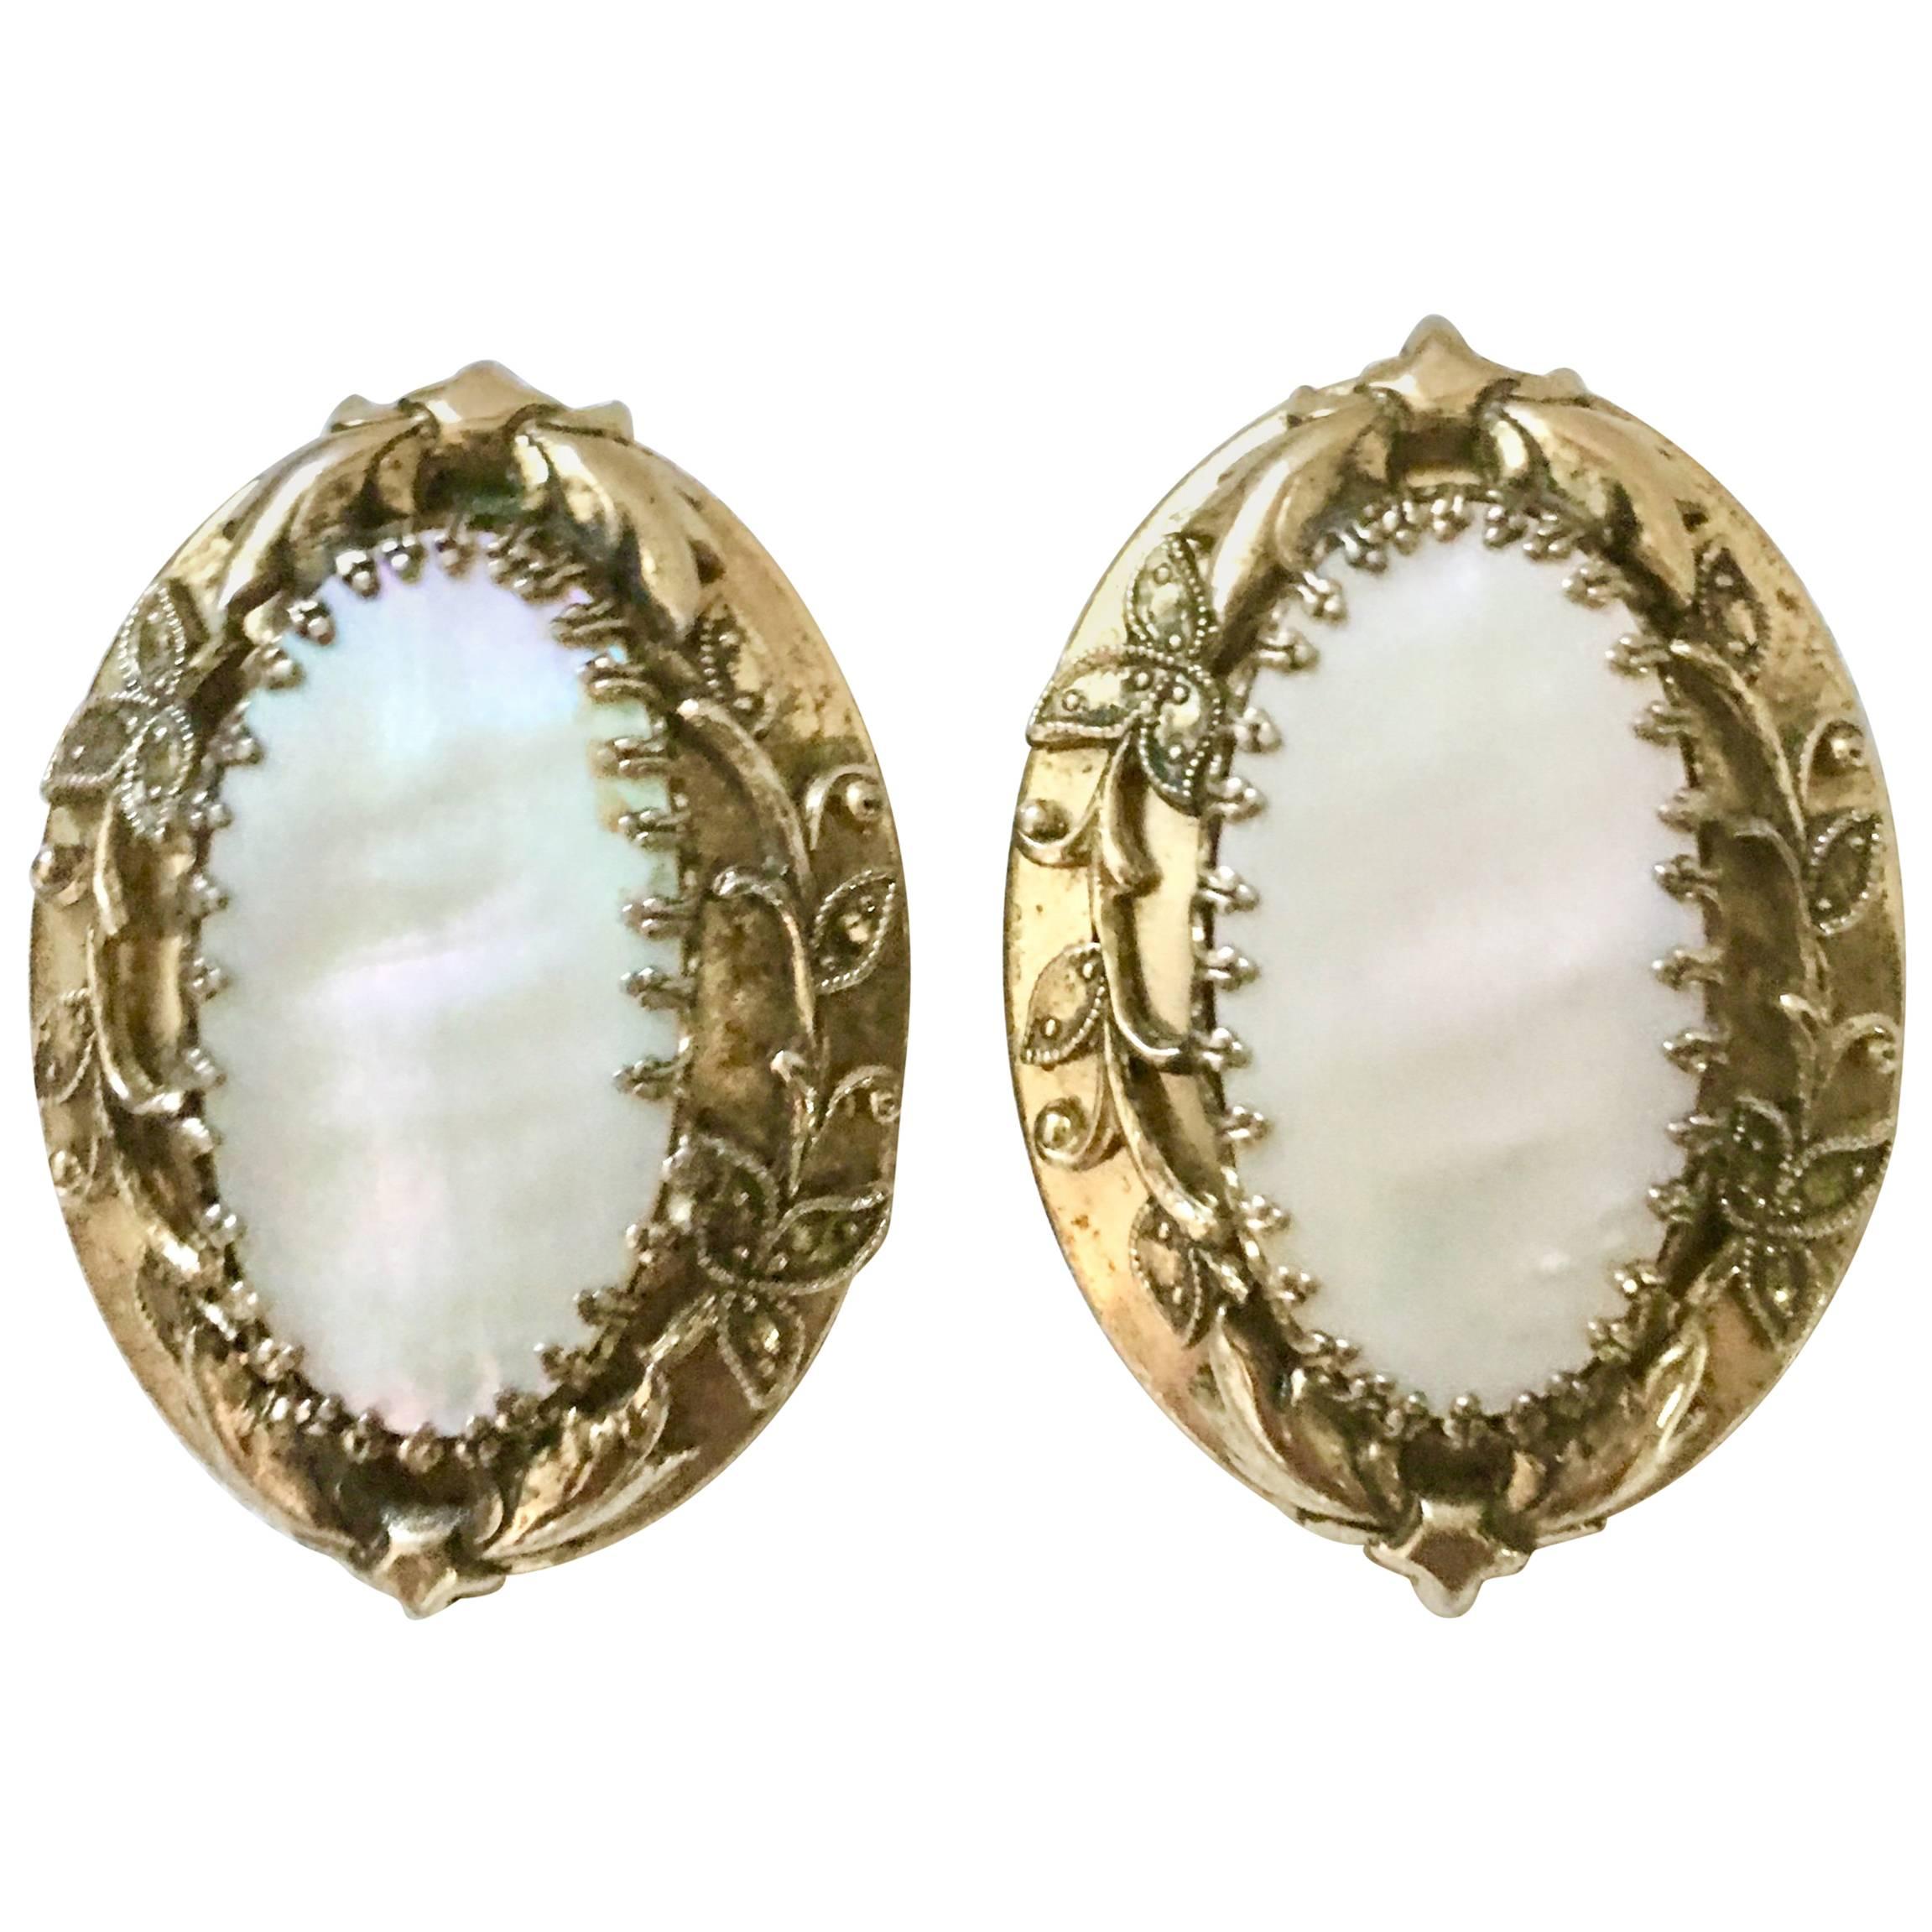 70's Art Nouveau Style Gold & Mother Of Pearl Earrings By, Whiting & Davis For Sale